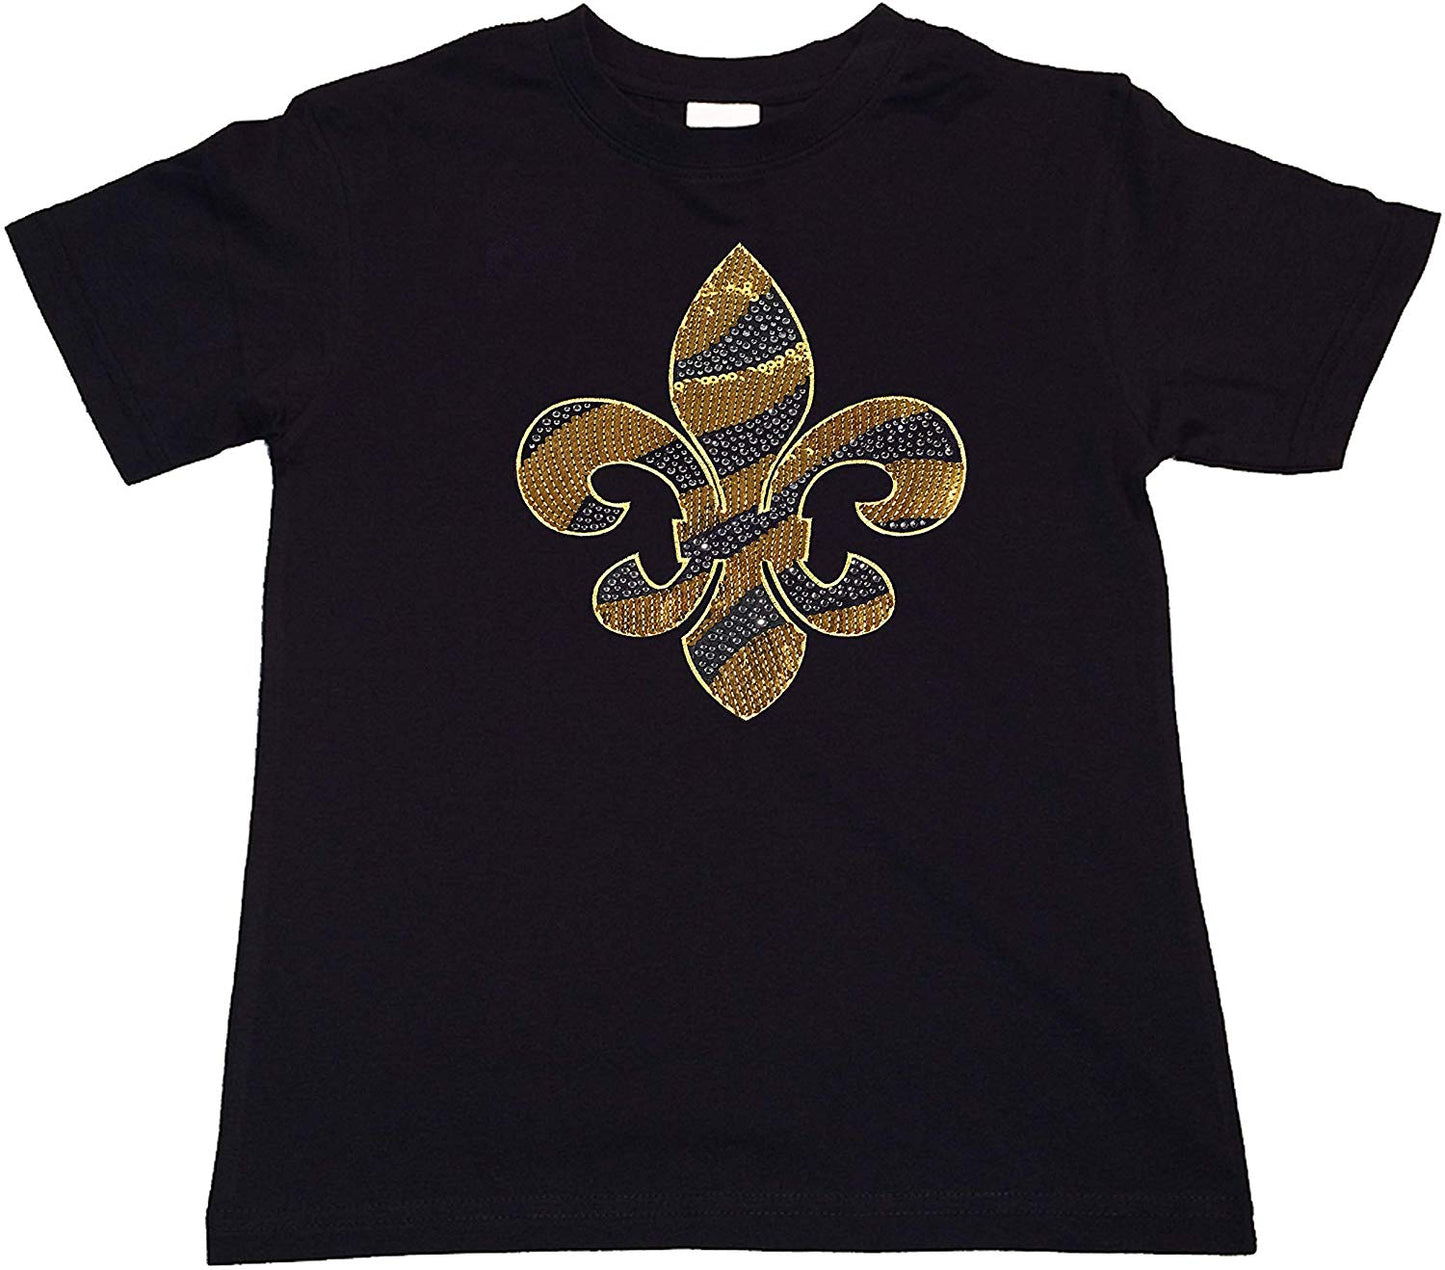 Girls Rhinestone T-Shirt " Gold Sequins and Rhinestones Fleur de Lis " Kids Size 3 to 14 Available